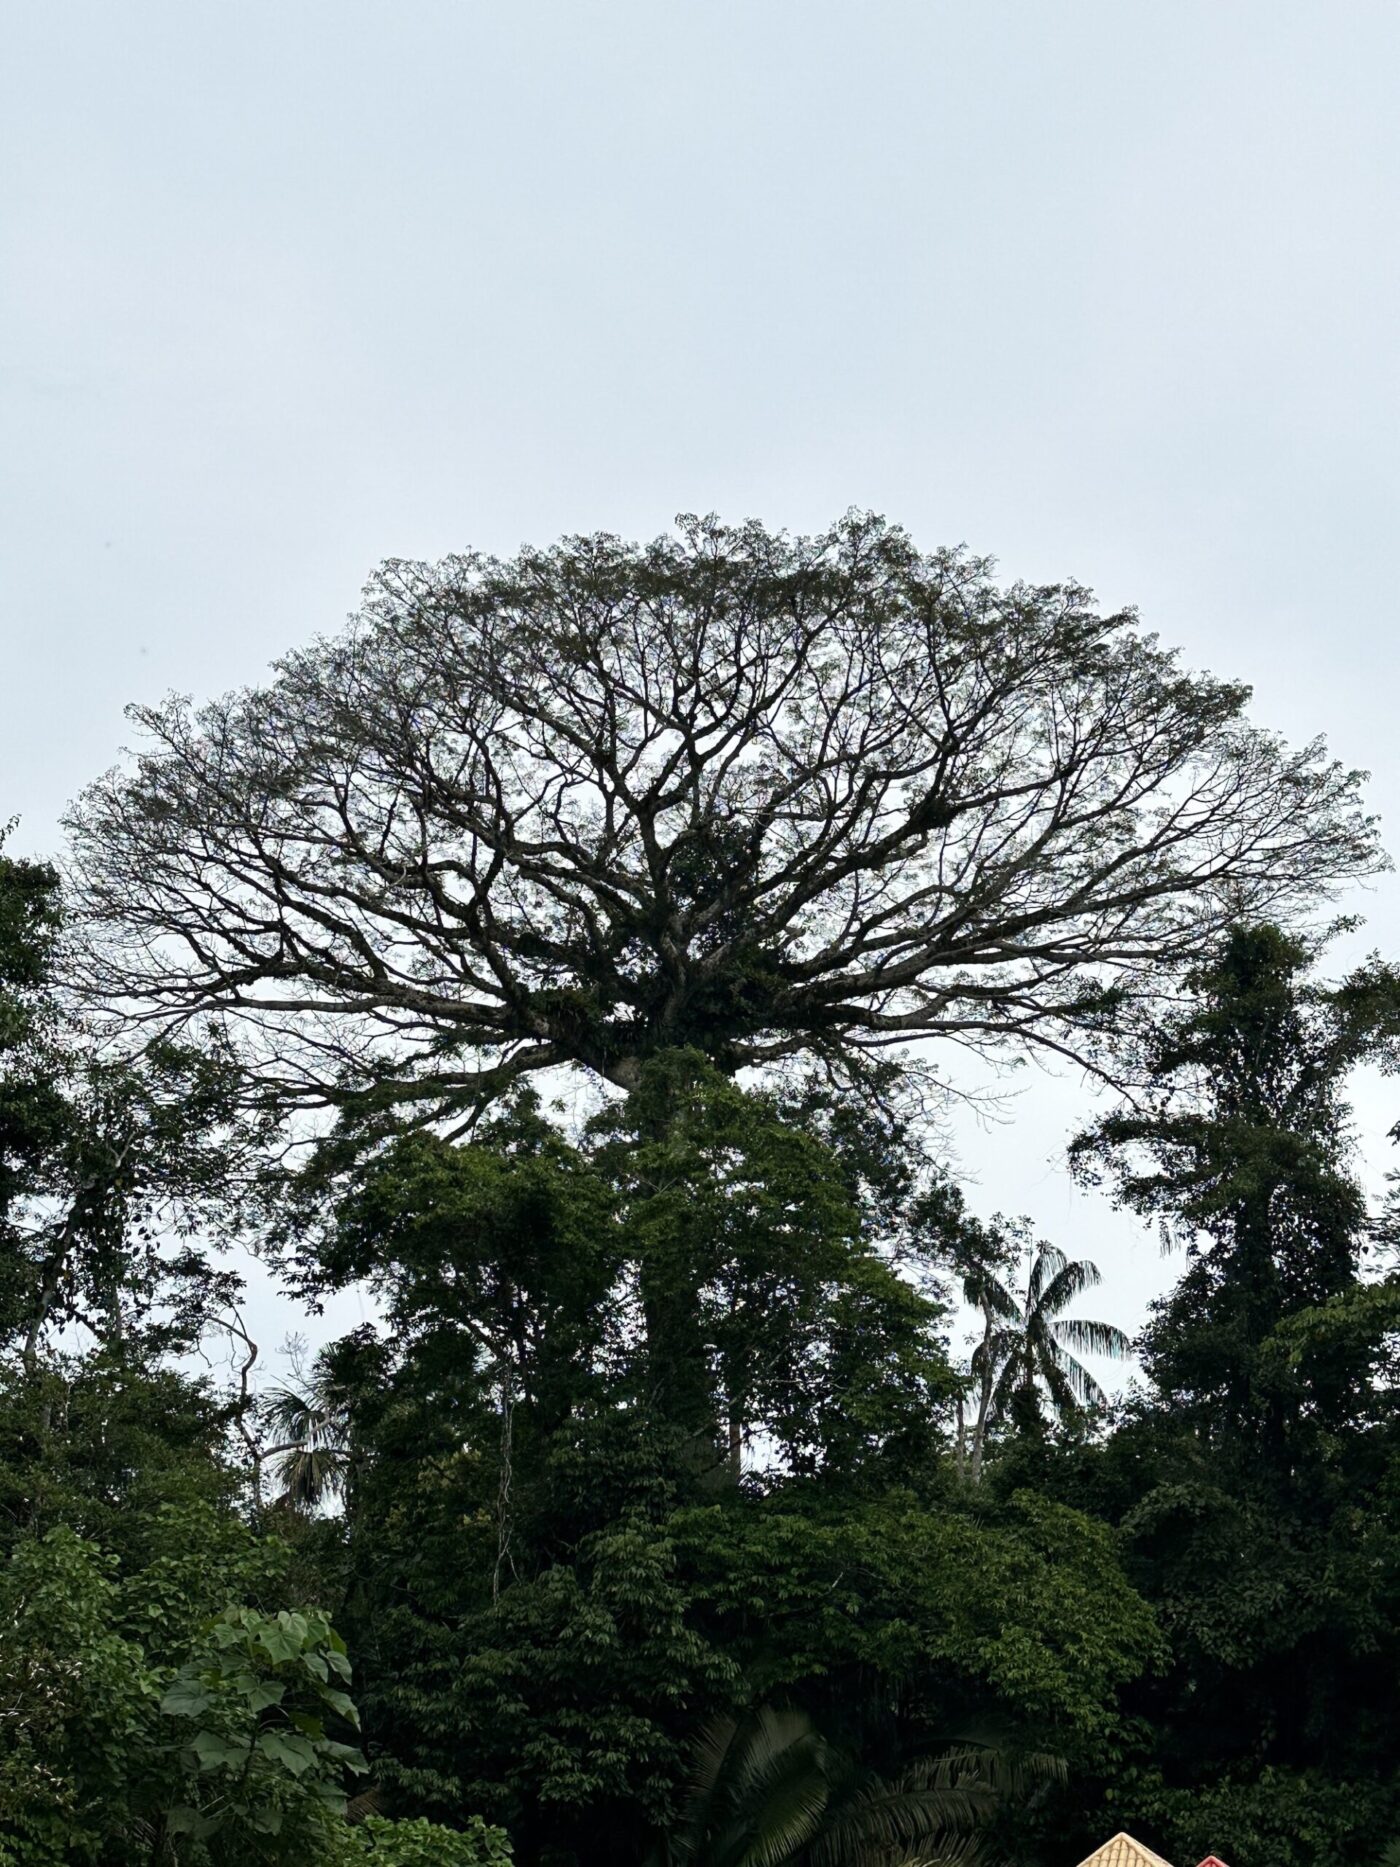 A tree in the Amazon rainforest.